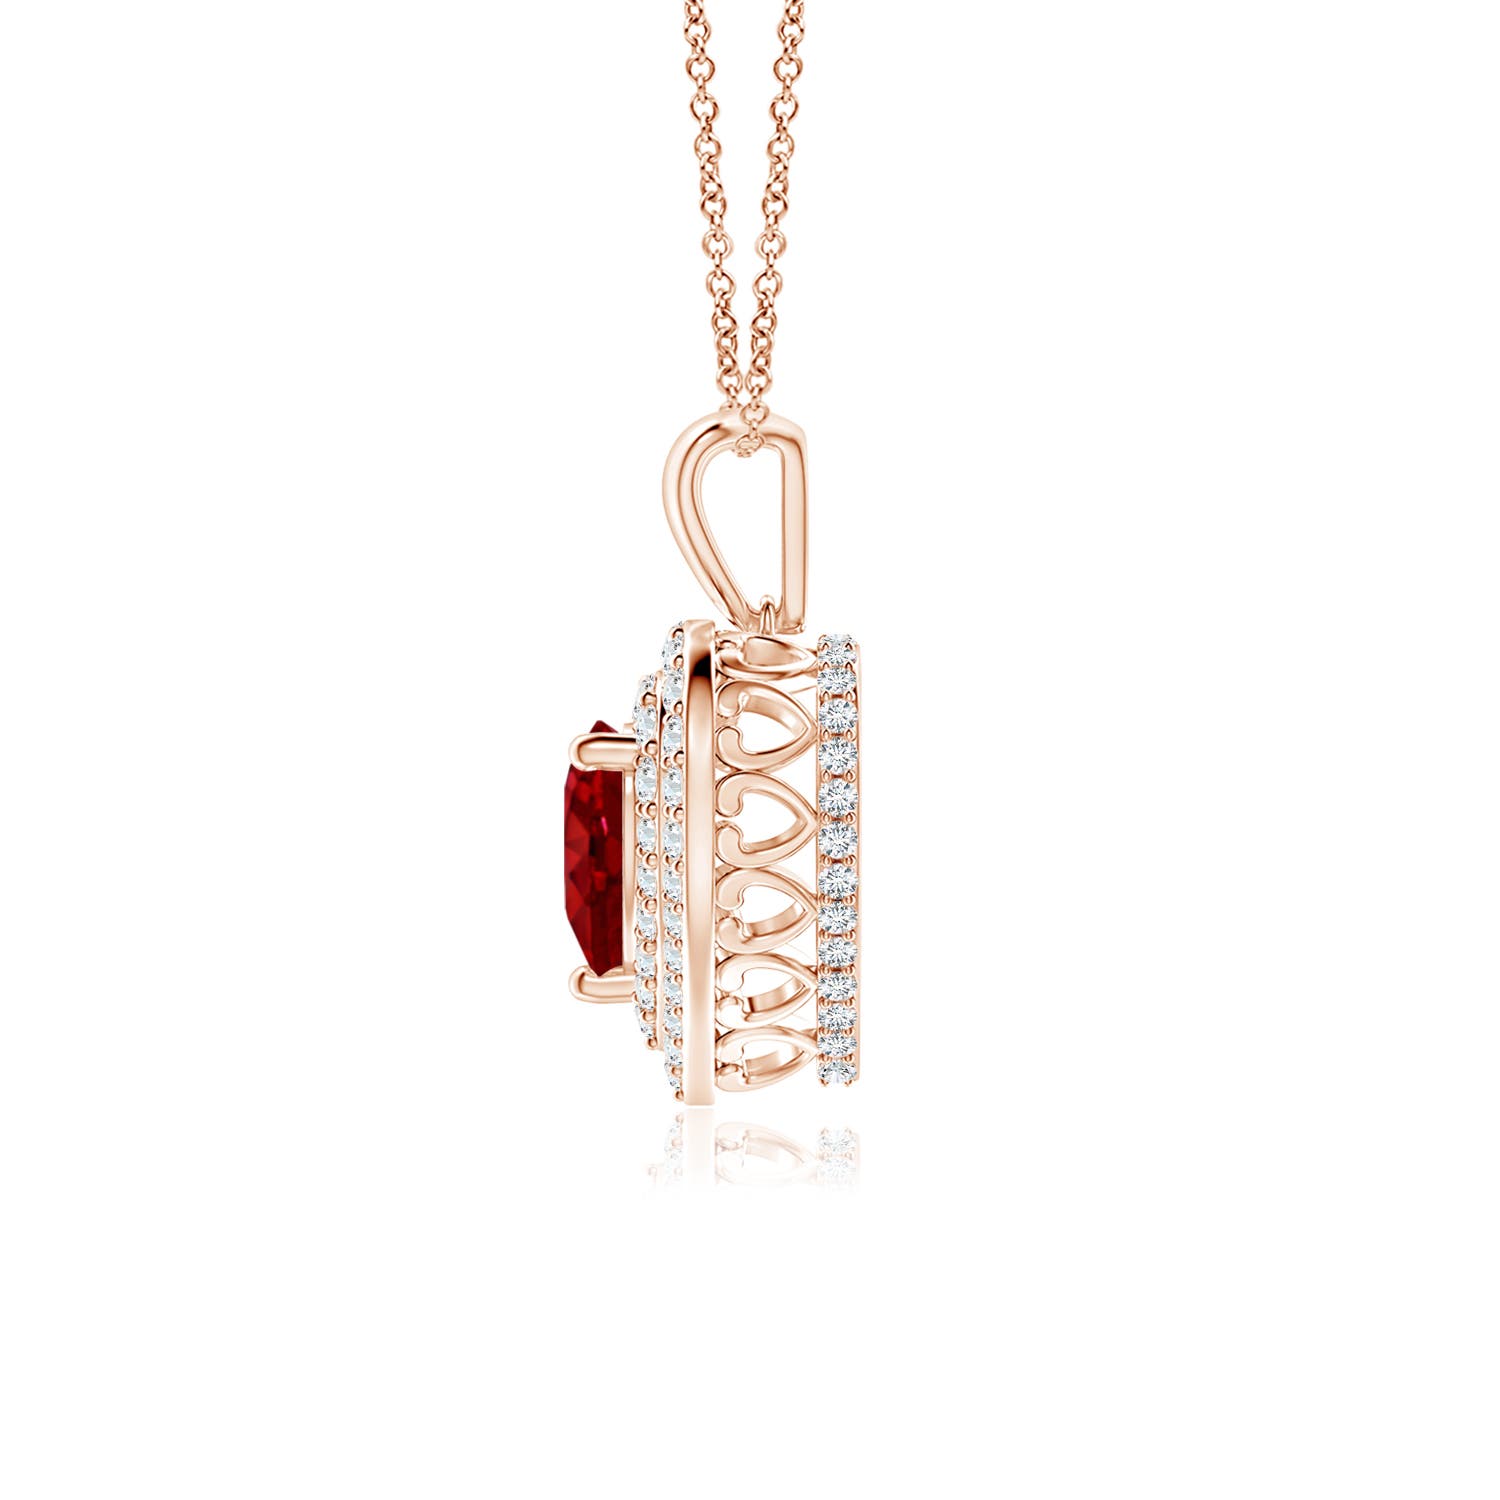 AAAA - Ruby / 1.25 CT / 14 KT Rose Gold